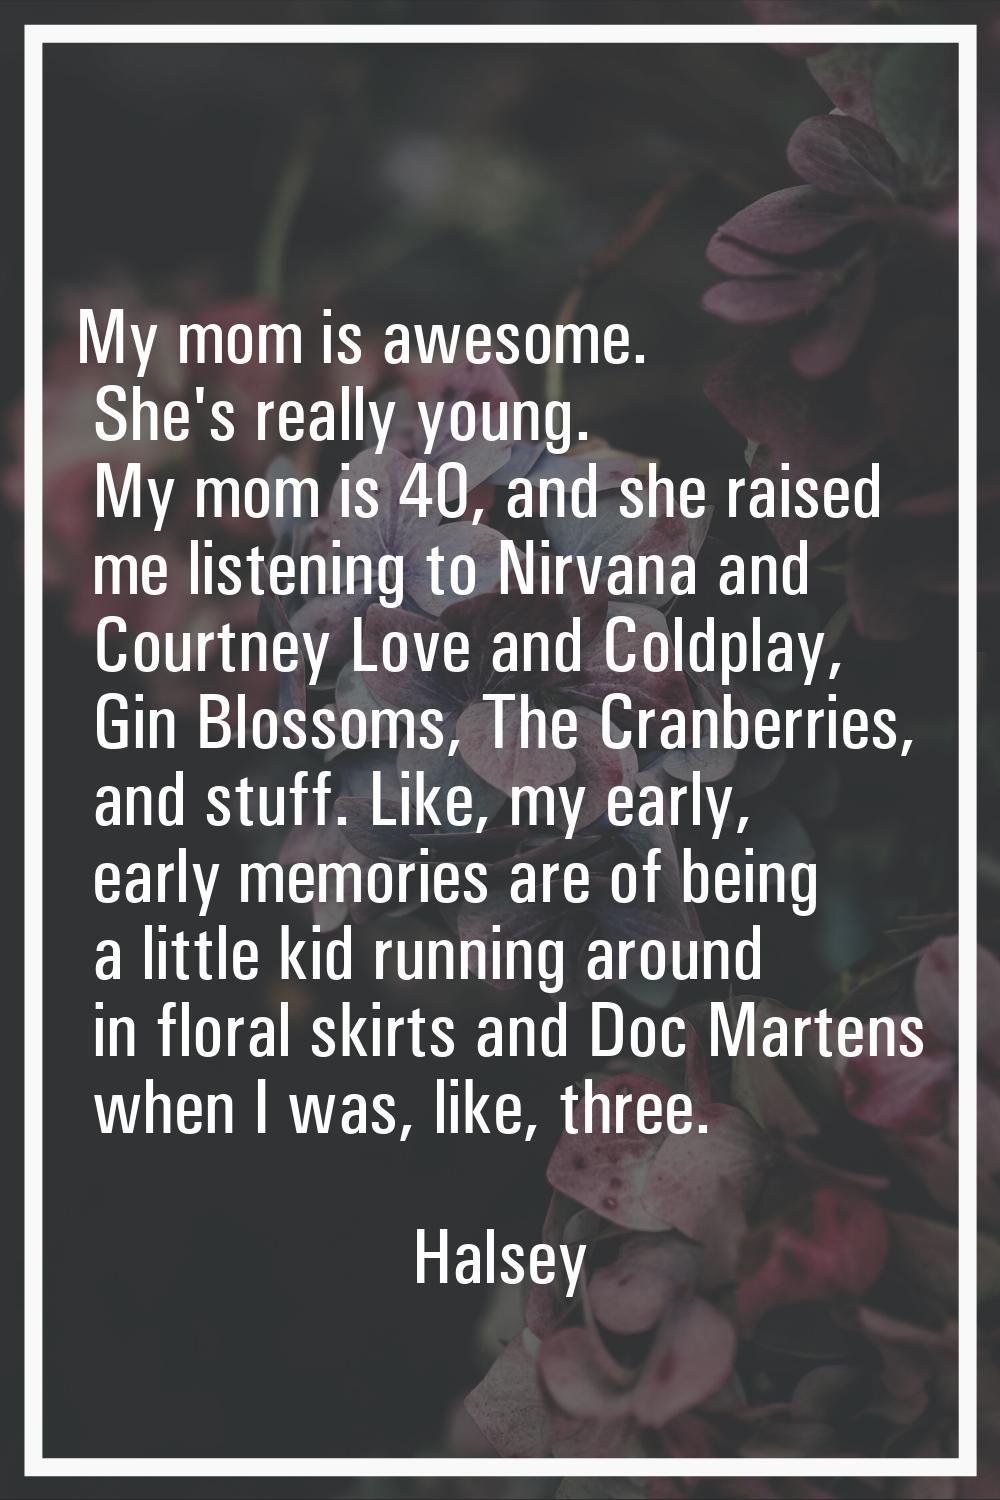 My mom is awesome. She's really young. My mom is 40, and she raised me listening to Nirvana and Cou